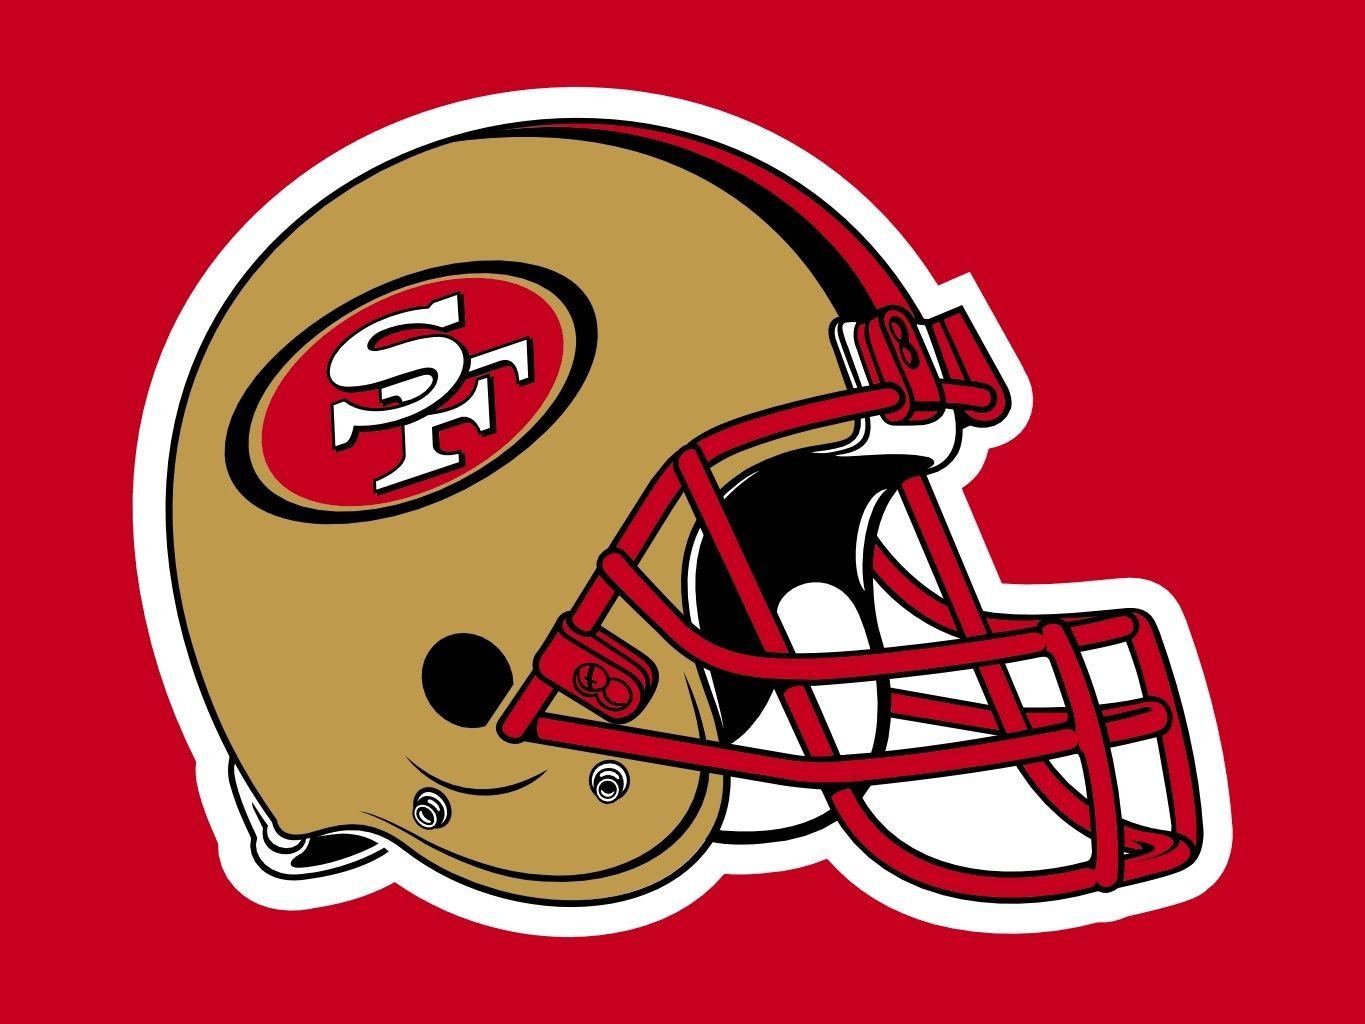 NFL 49ers Logo - PC5 for Tuesday, September 20, 2016: Top Five All-Time San Francisco ...